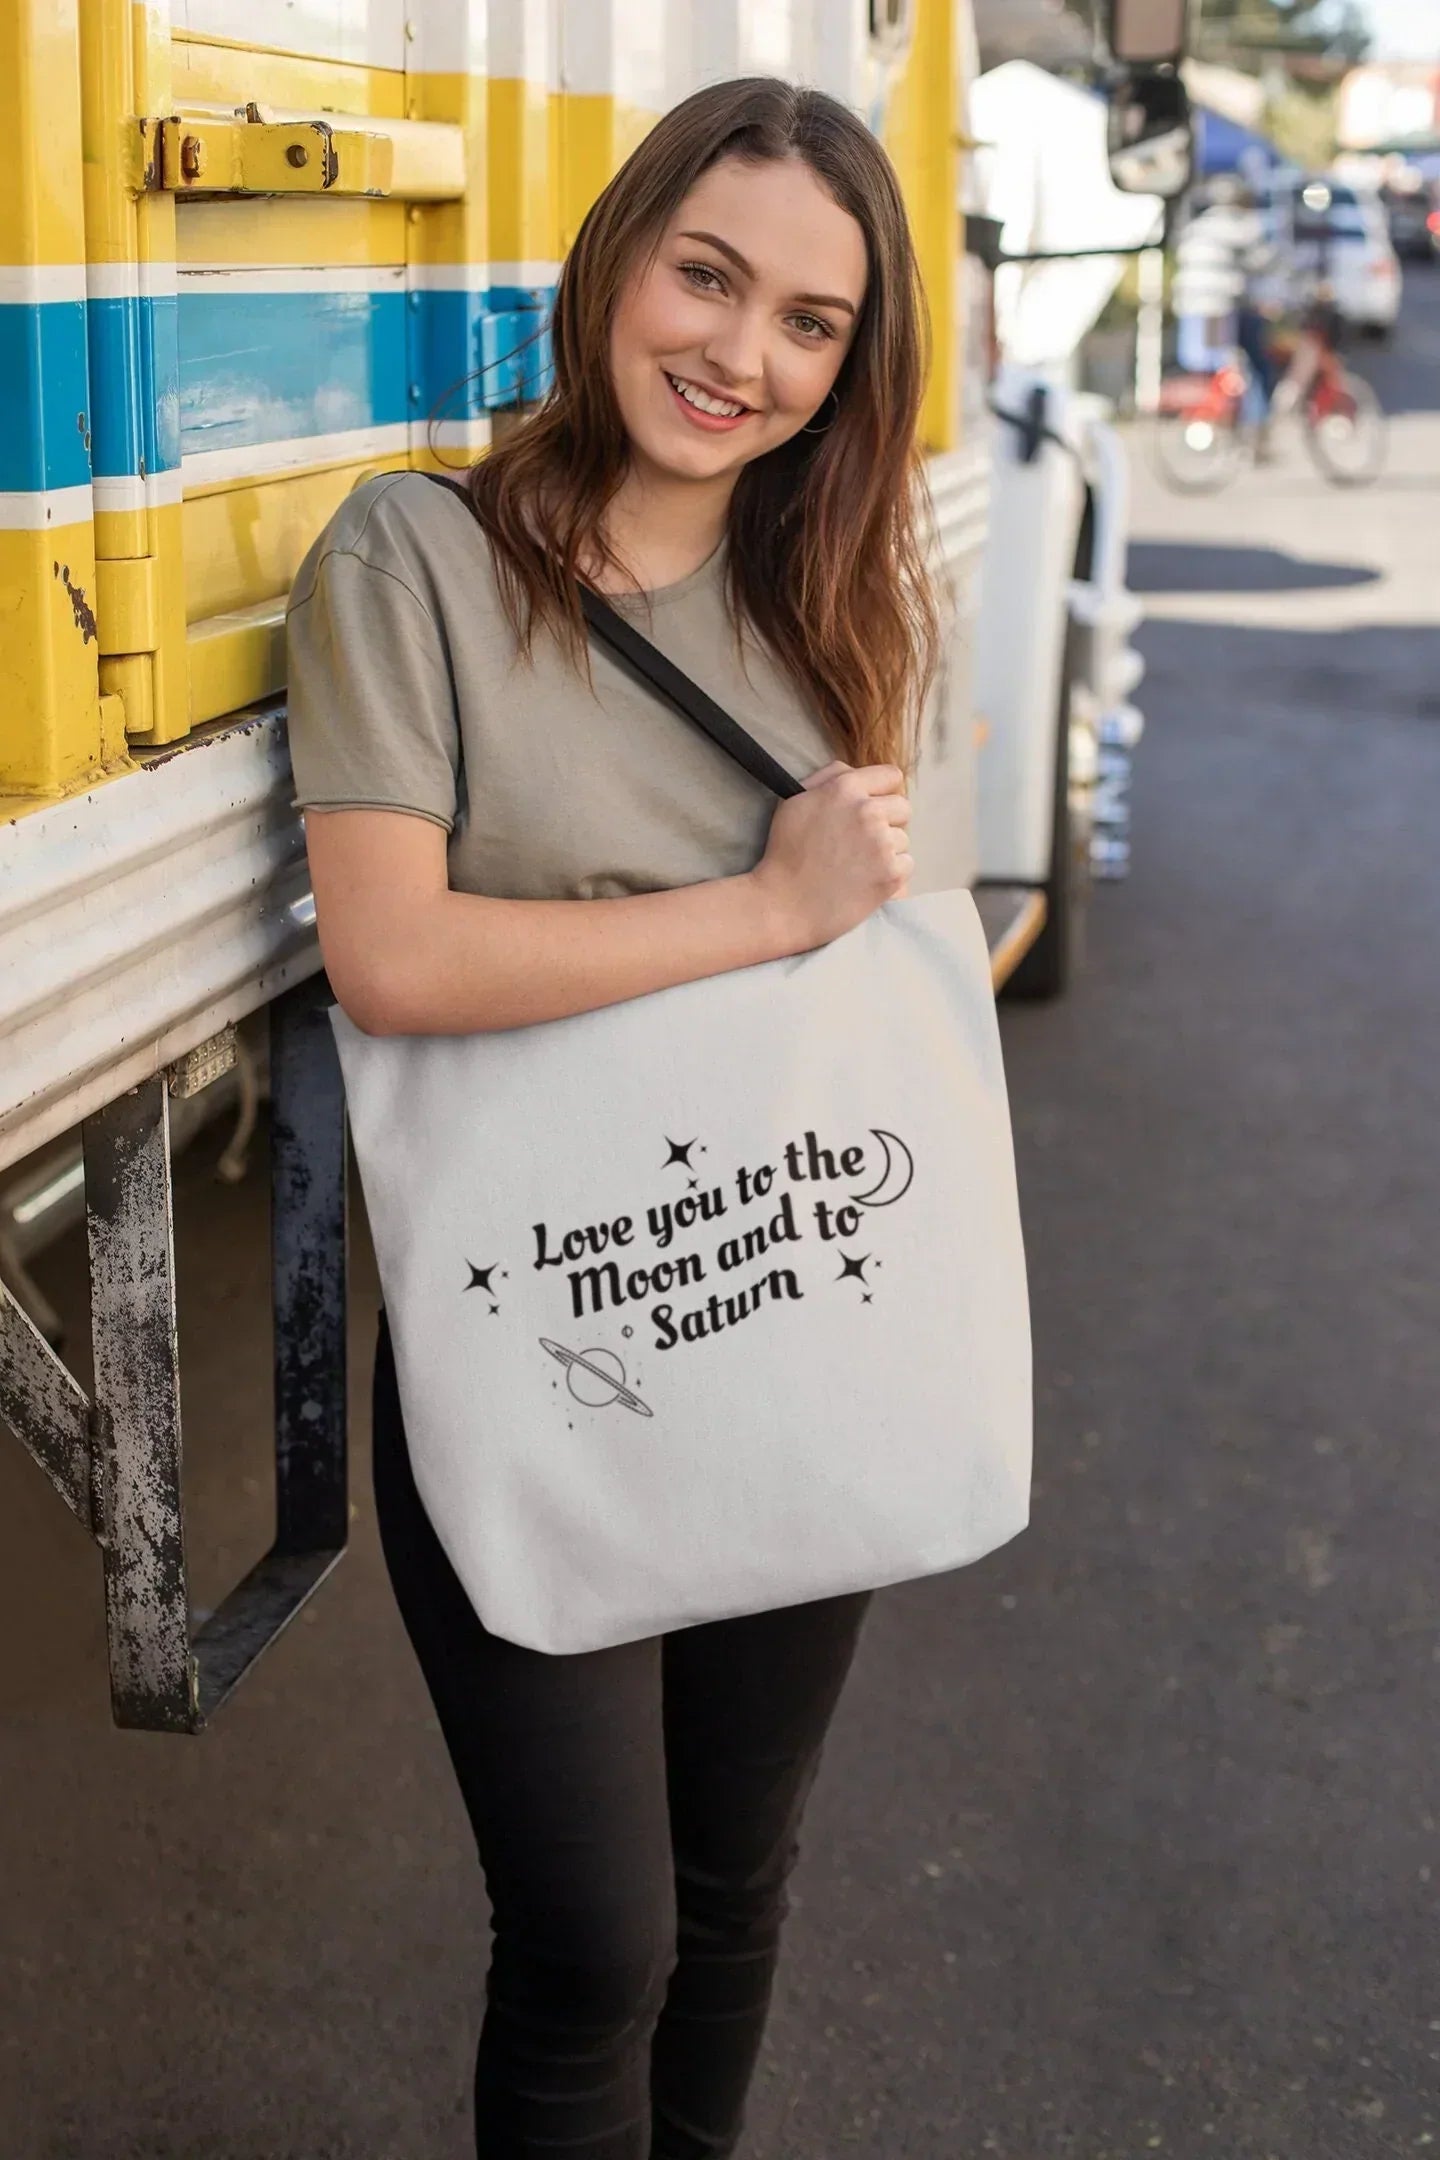 Love You to the Moon and to Saturn | Taylor Swift Tote Bag | Marjorie Song Lyrics Reusable Gift | Swiftie Fan Bag | Evermore Canvas